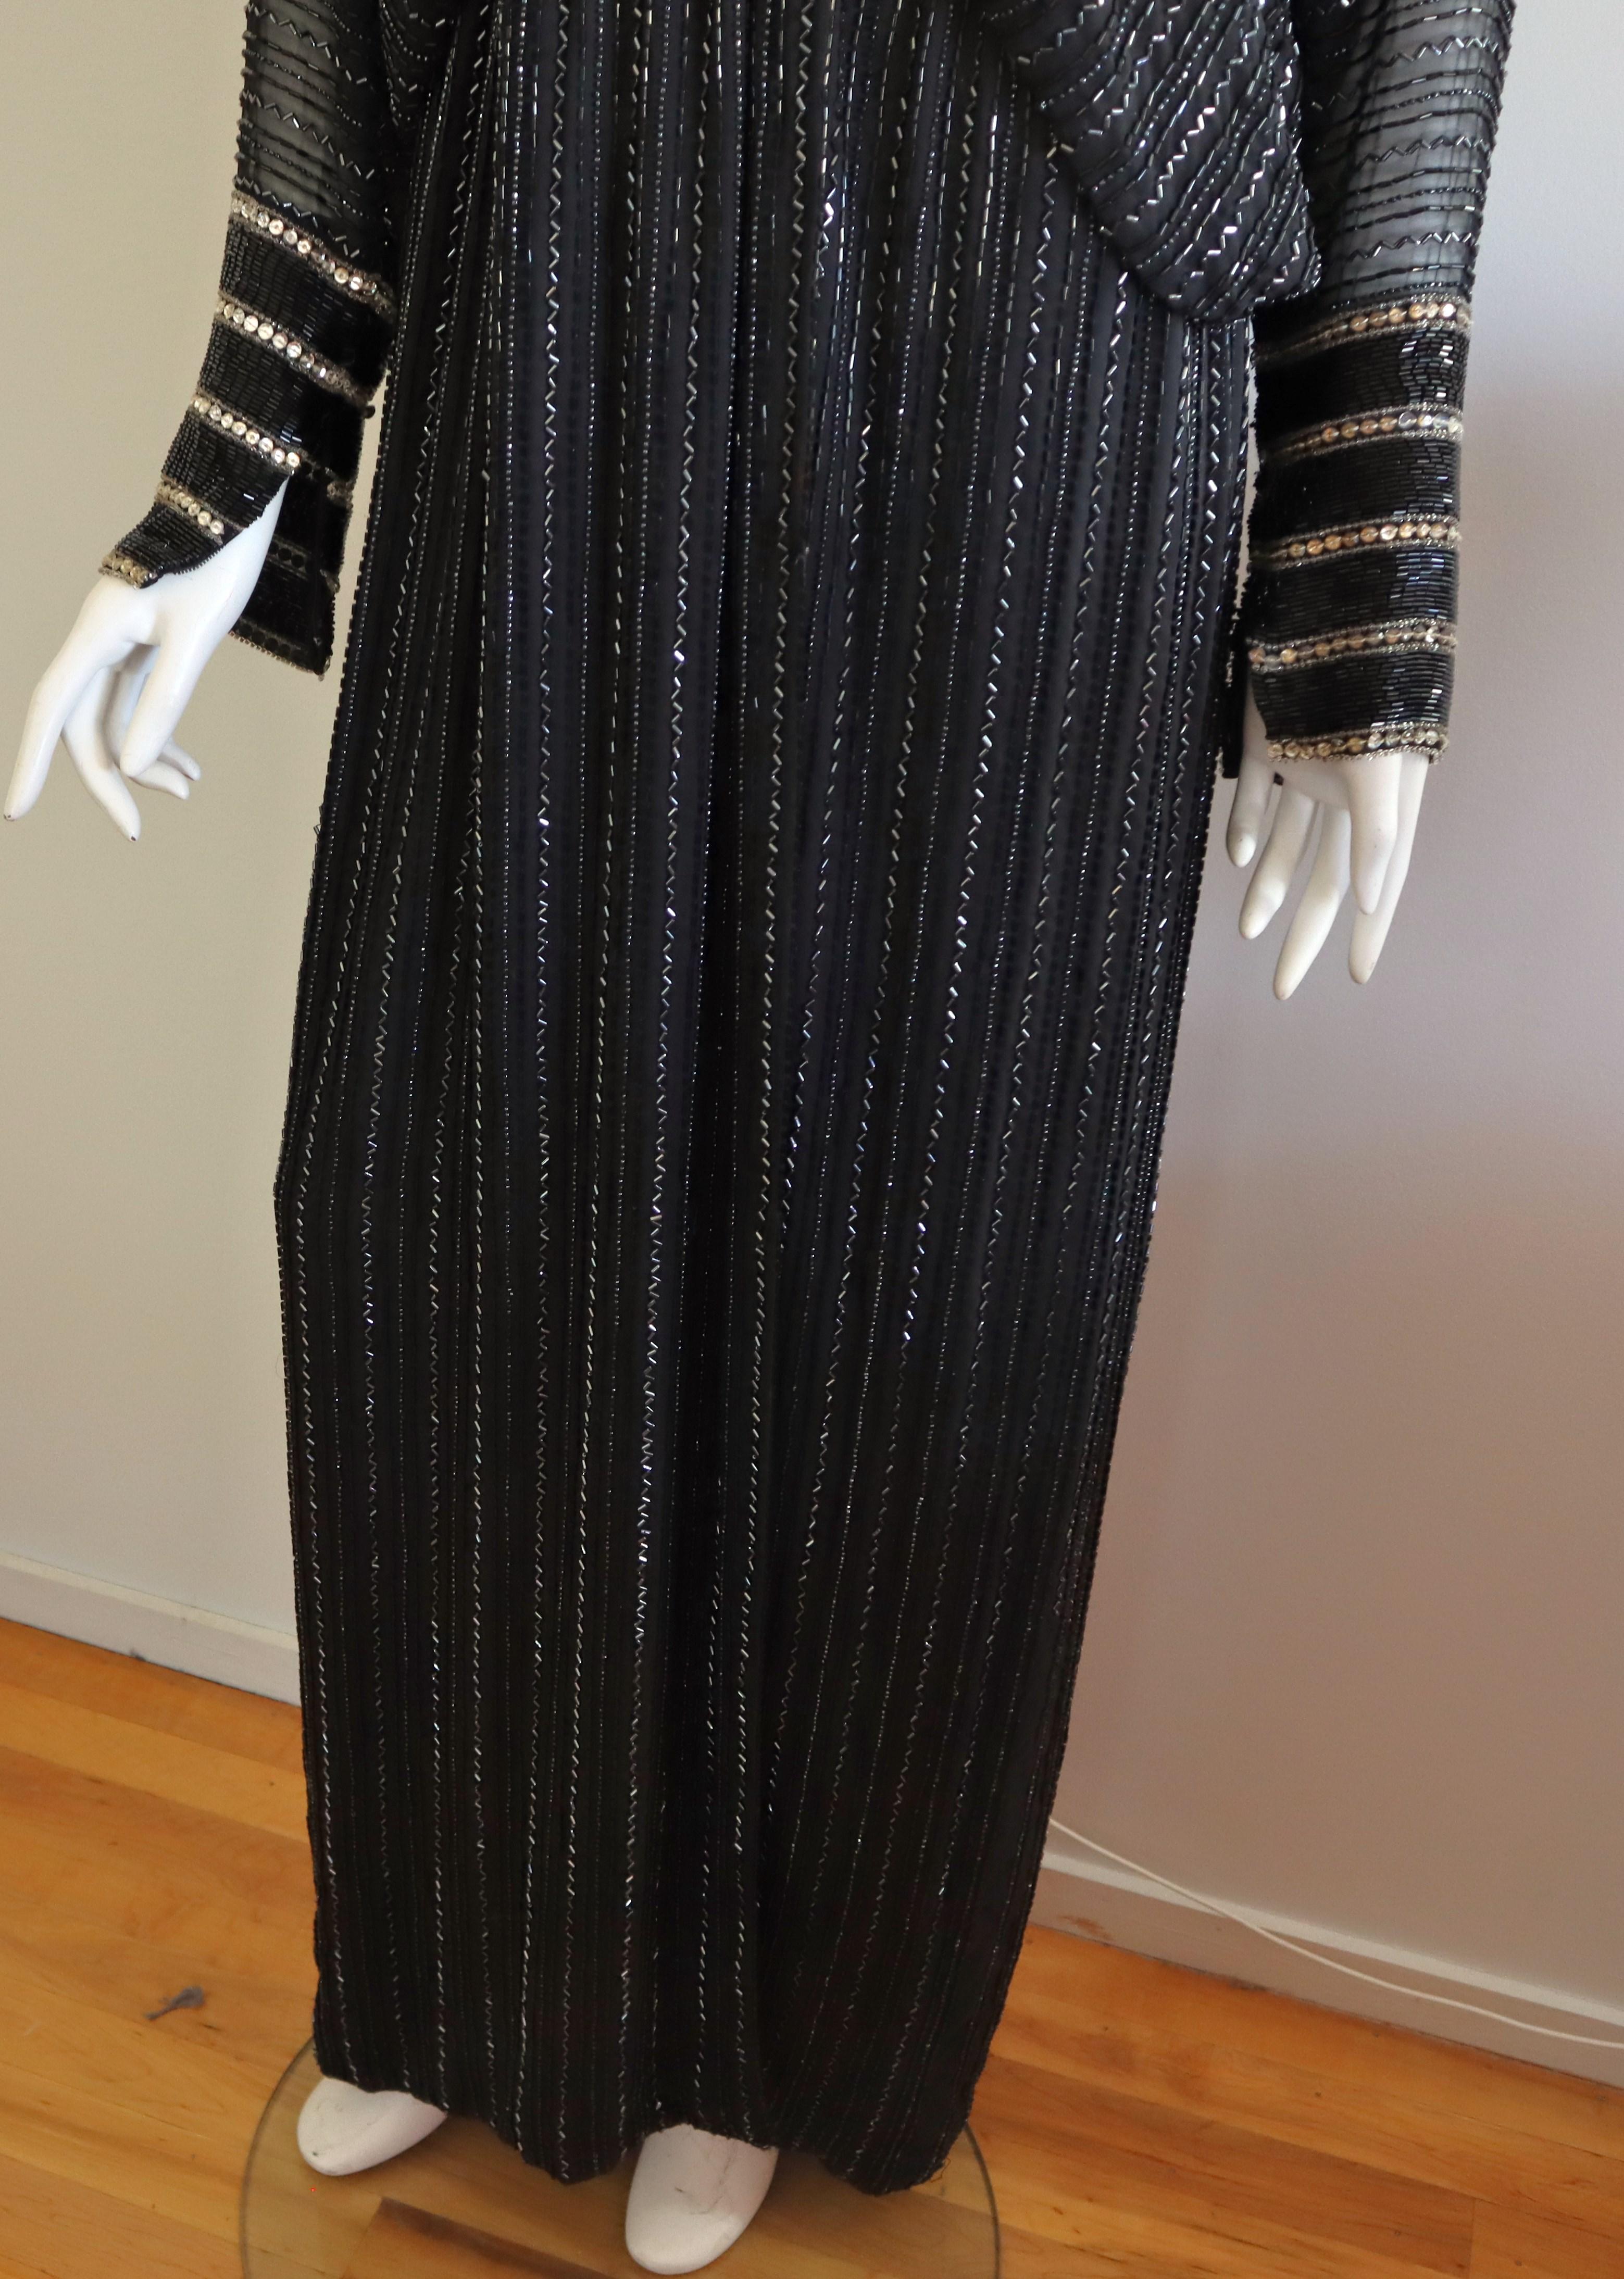 1970s BOB MACKIE Beaded Batwing Gown In Good Condition For Sale In Wallkill, NY